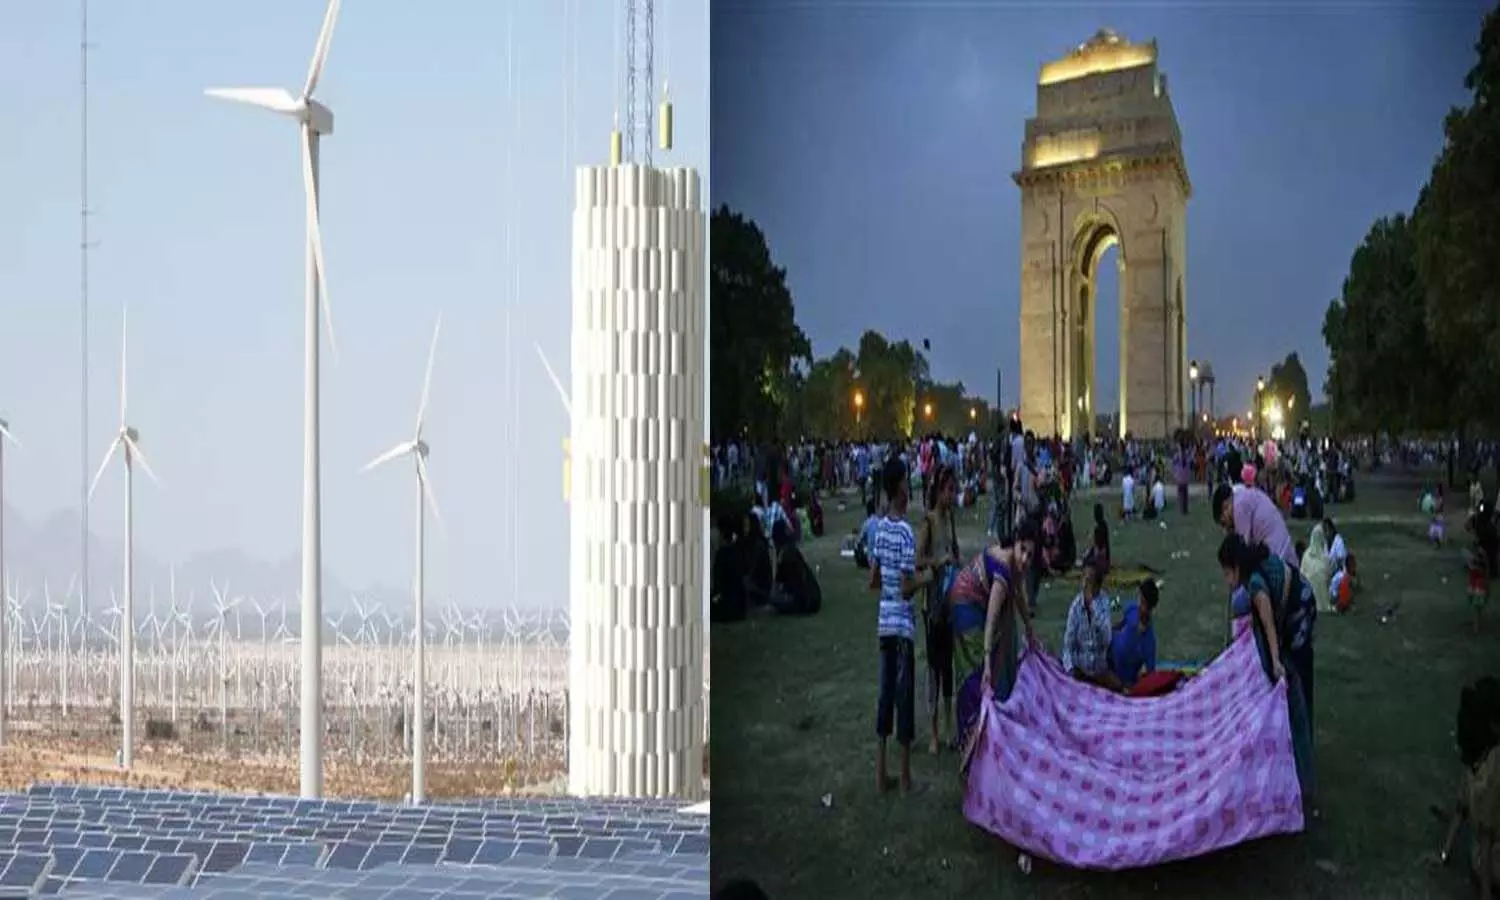 Delhi may be completely dependent on Renewable Energy